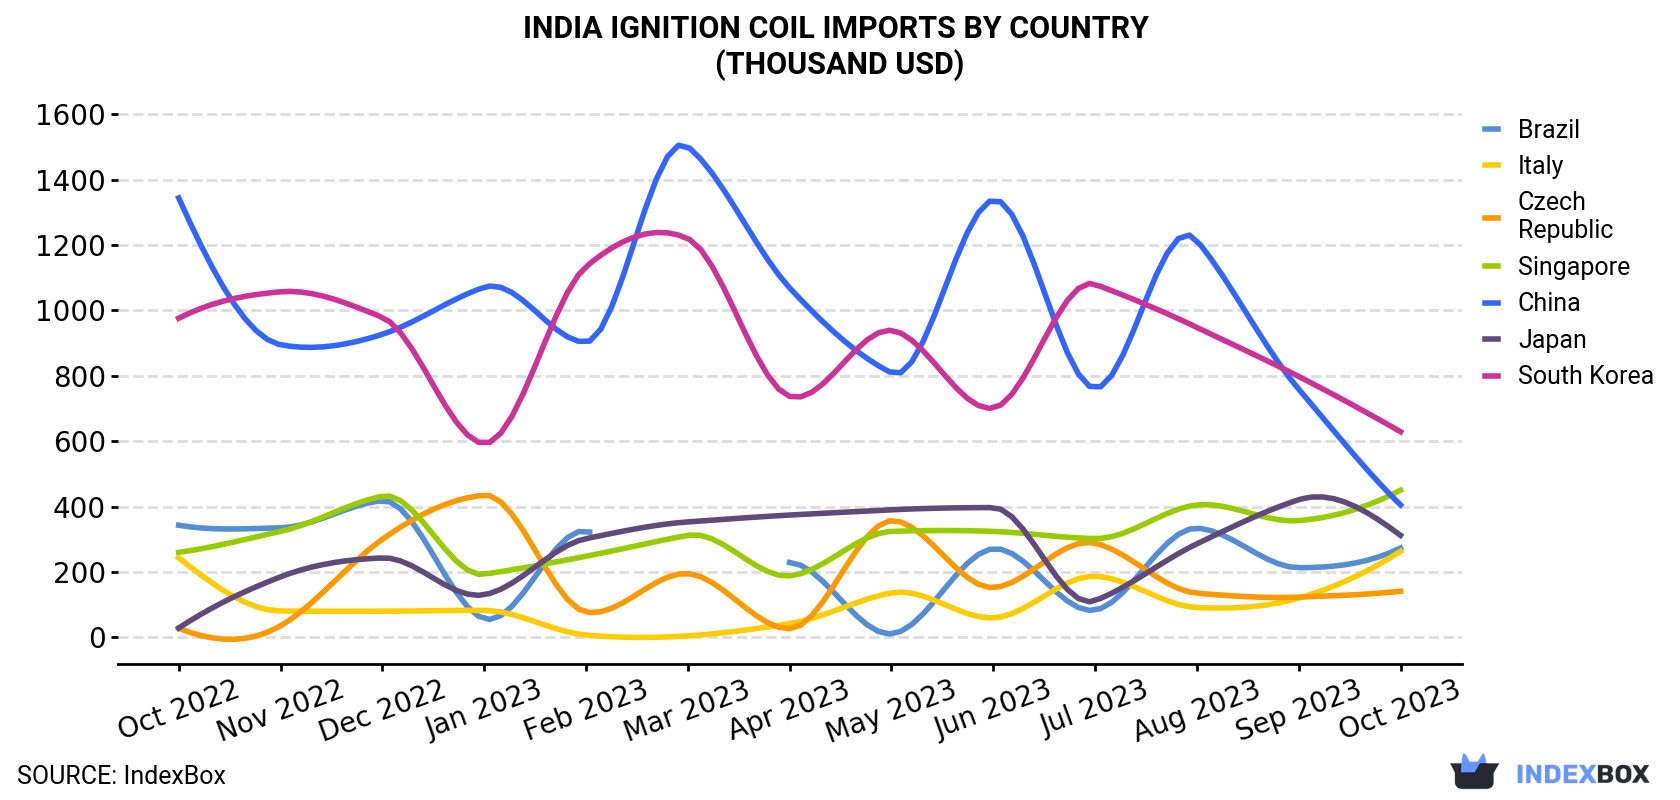 India Ignition Coil Imports By Country (Thousand USD)